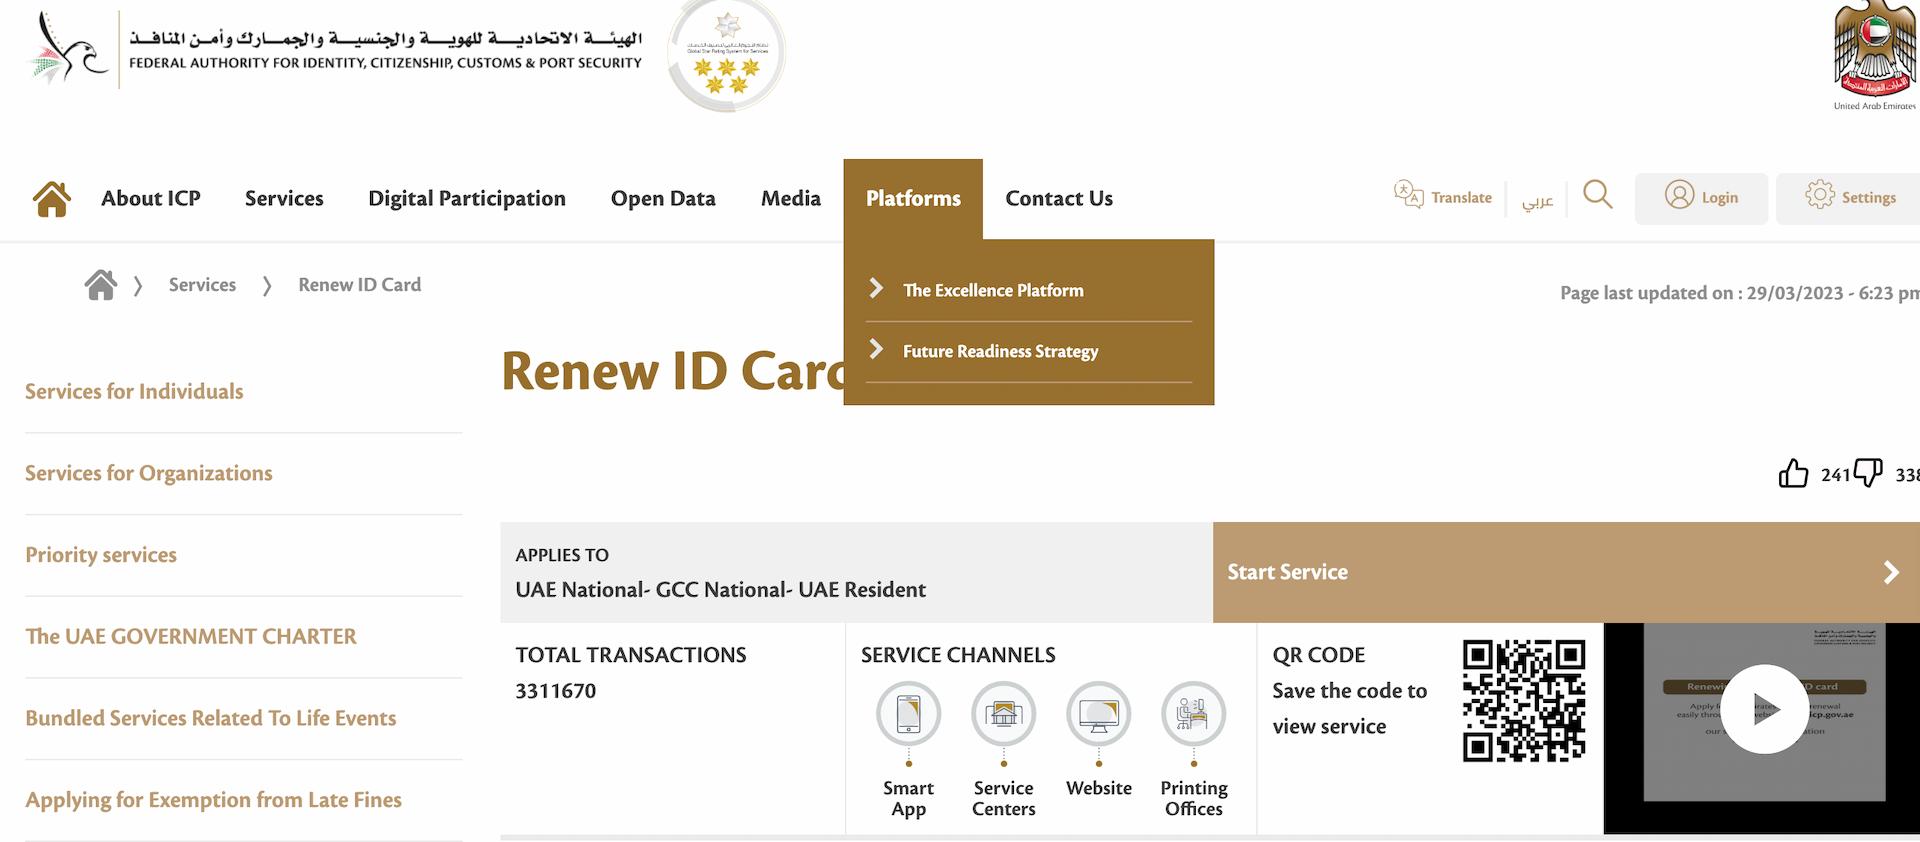 A screenshot of the ICP website showing you how to renew your Emirates ID card.